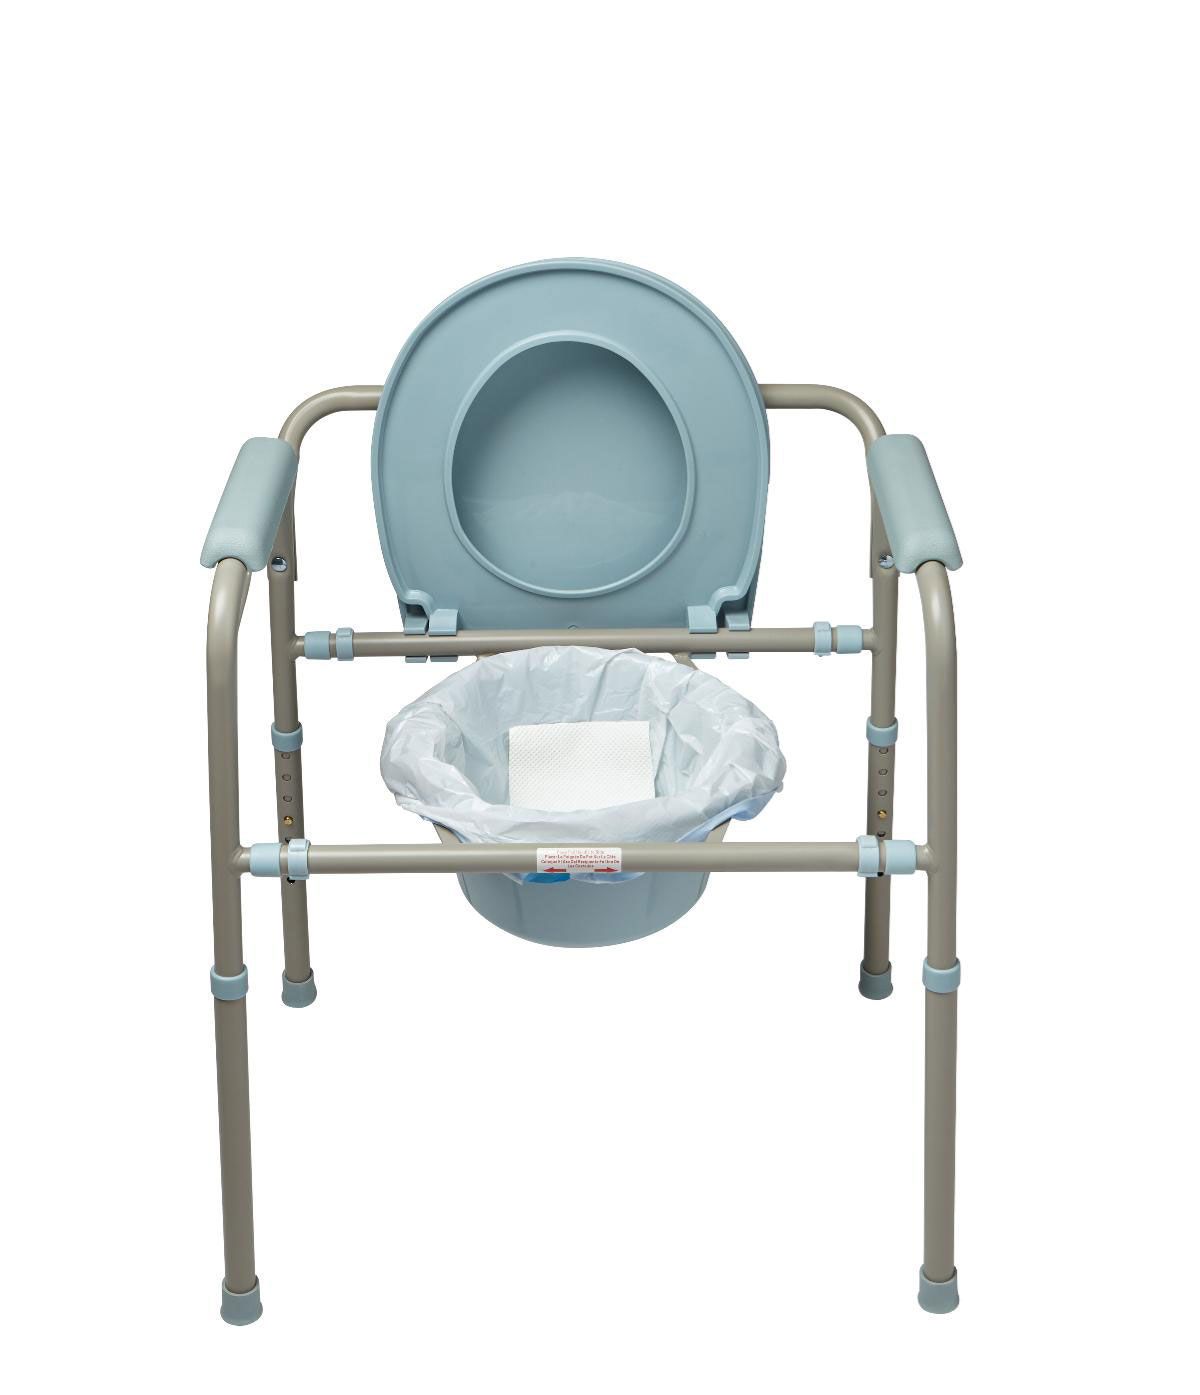 Medline Universal Commode Liner with Absorbent Pad